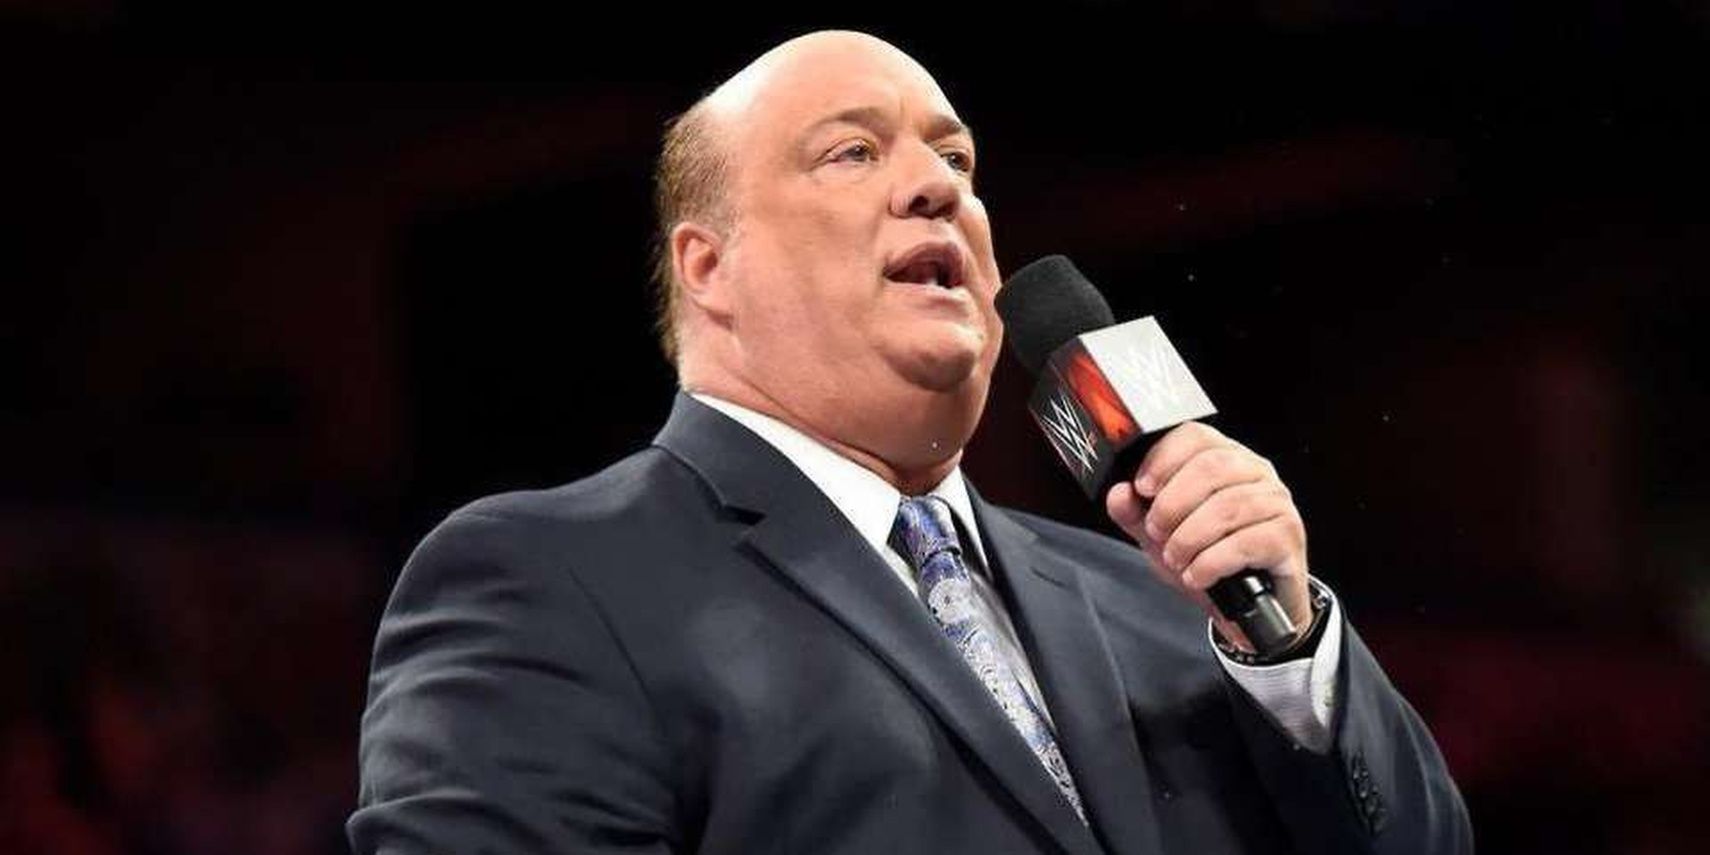 10 Backstage Stories About Paul Heyman We Can't Believe